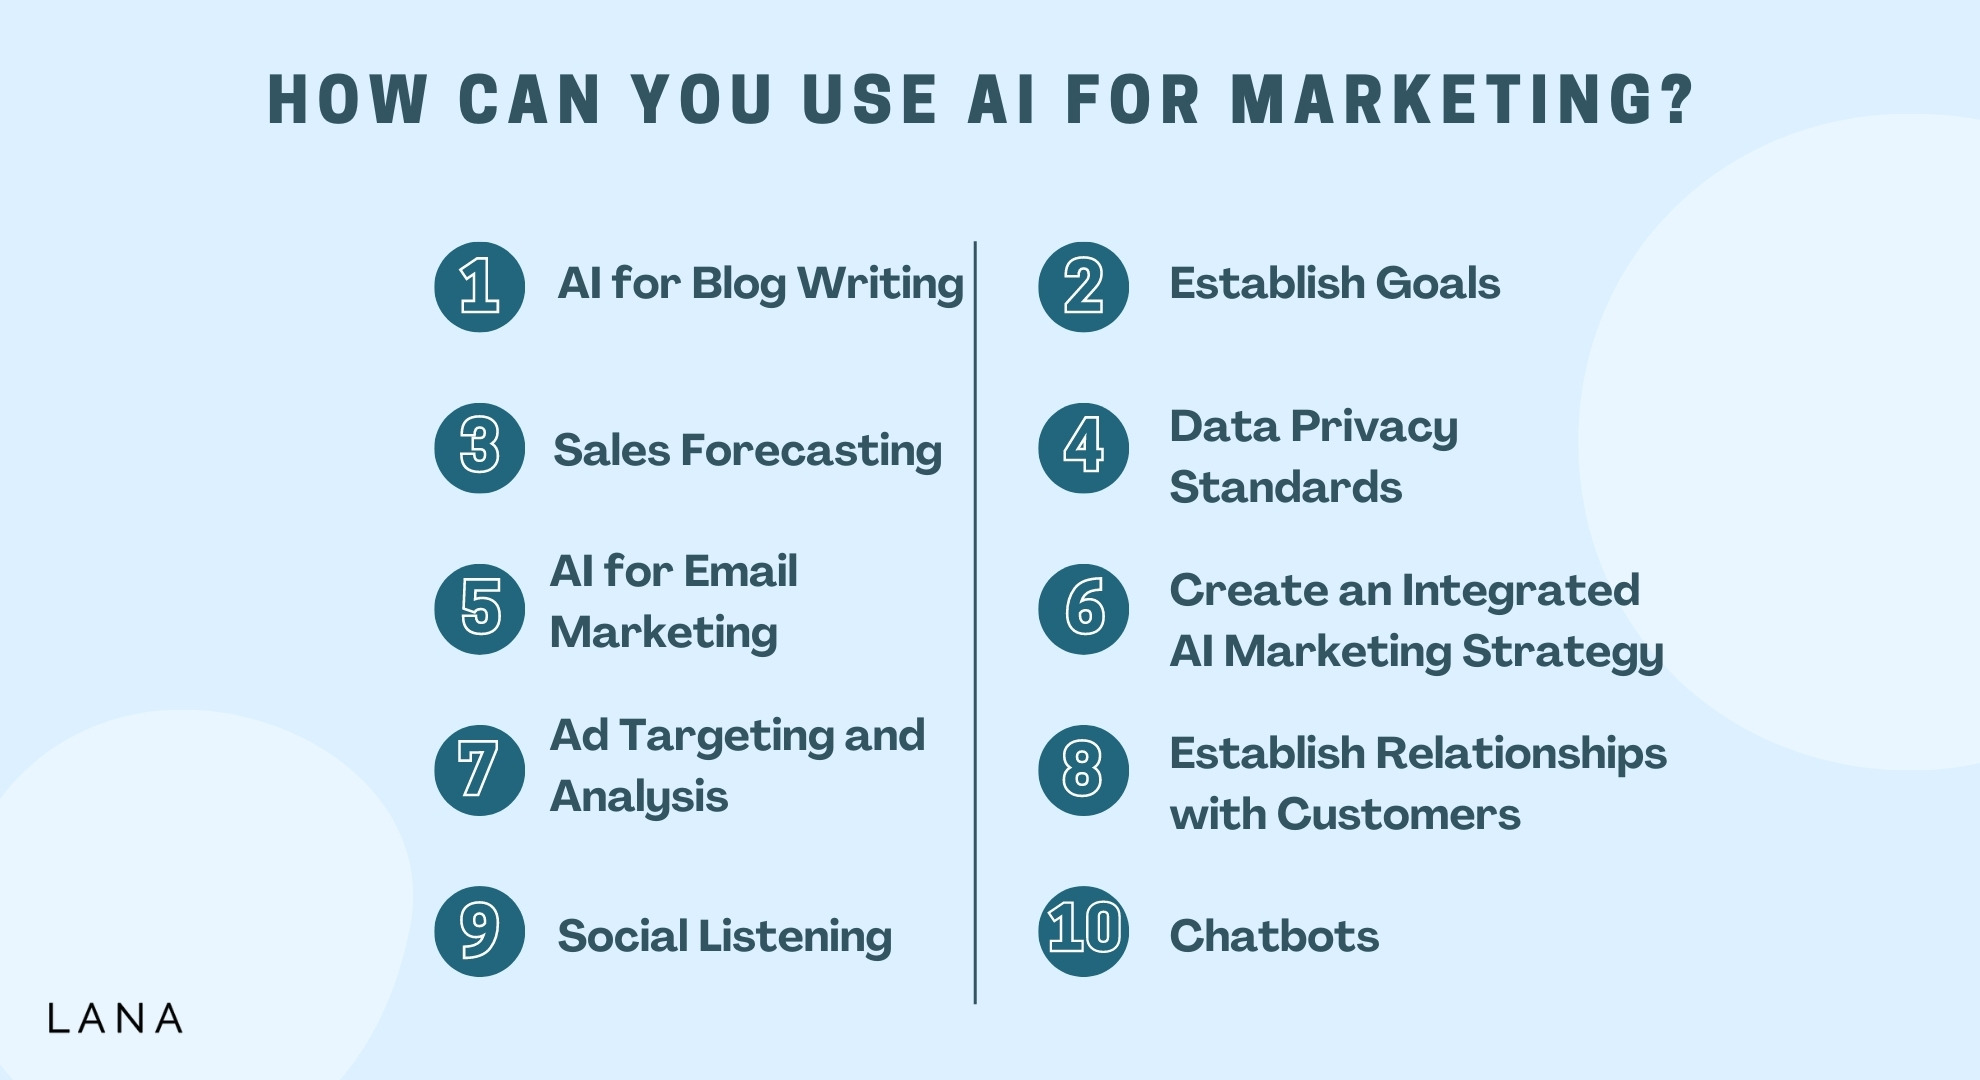 How can you use AI for Marketing 